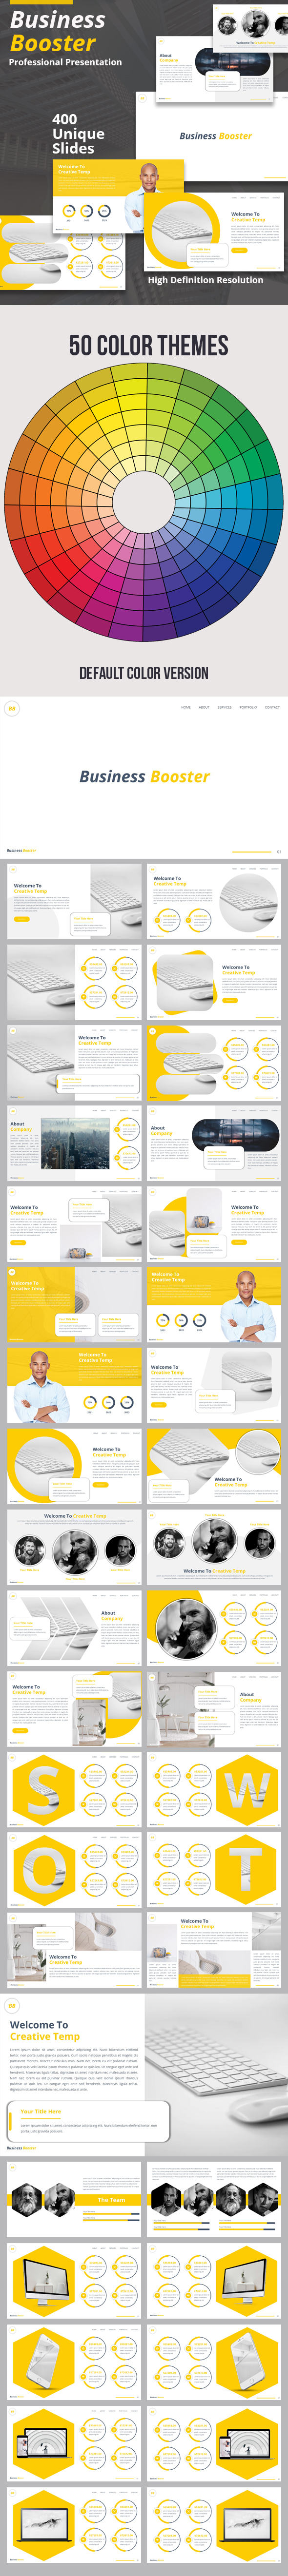 [DOWNLOAD]Business Booster Powerpoint Presentation Template